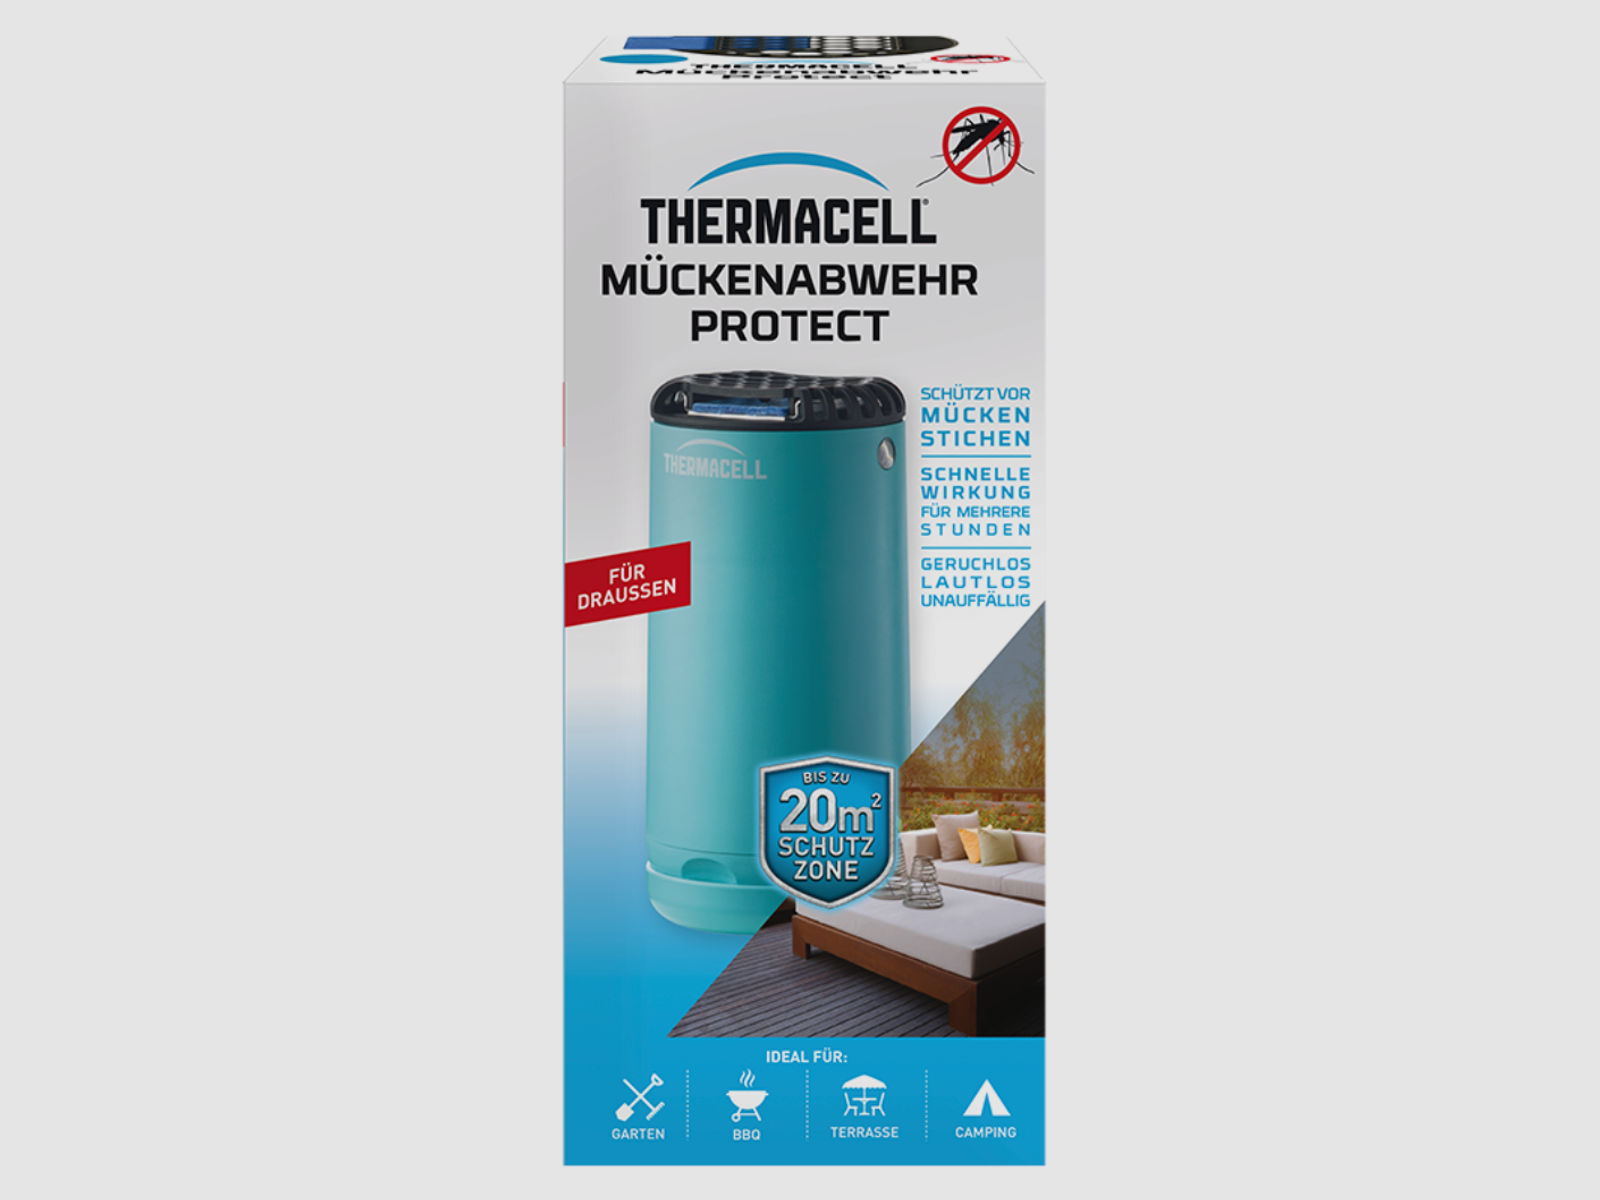 THERMACELL Mückenabwehr Protect in blau 86600495